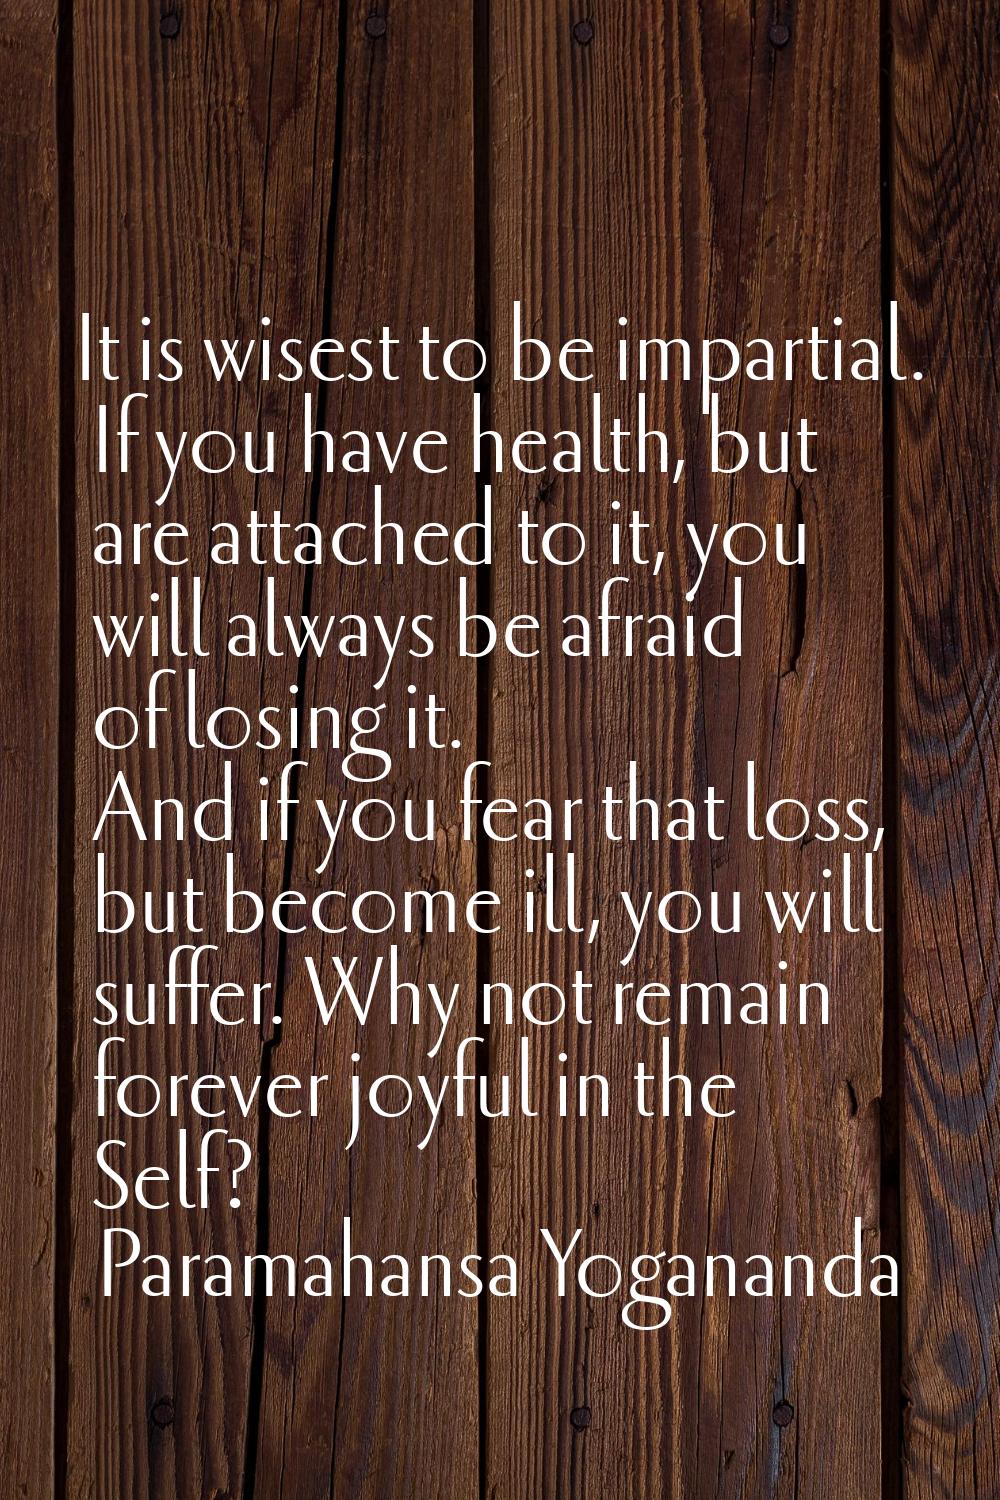 It is wisest to be impartial. If you have health, but are attached to it, you will always be afraid